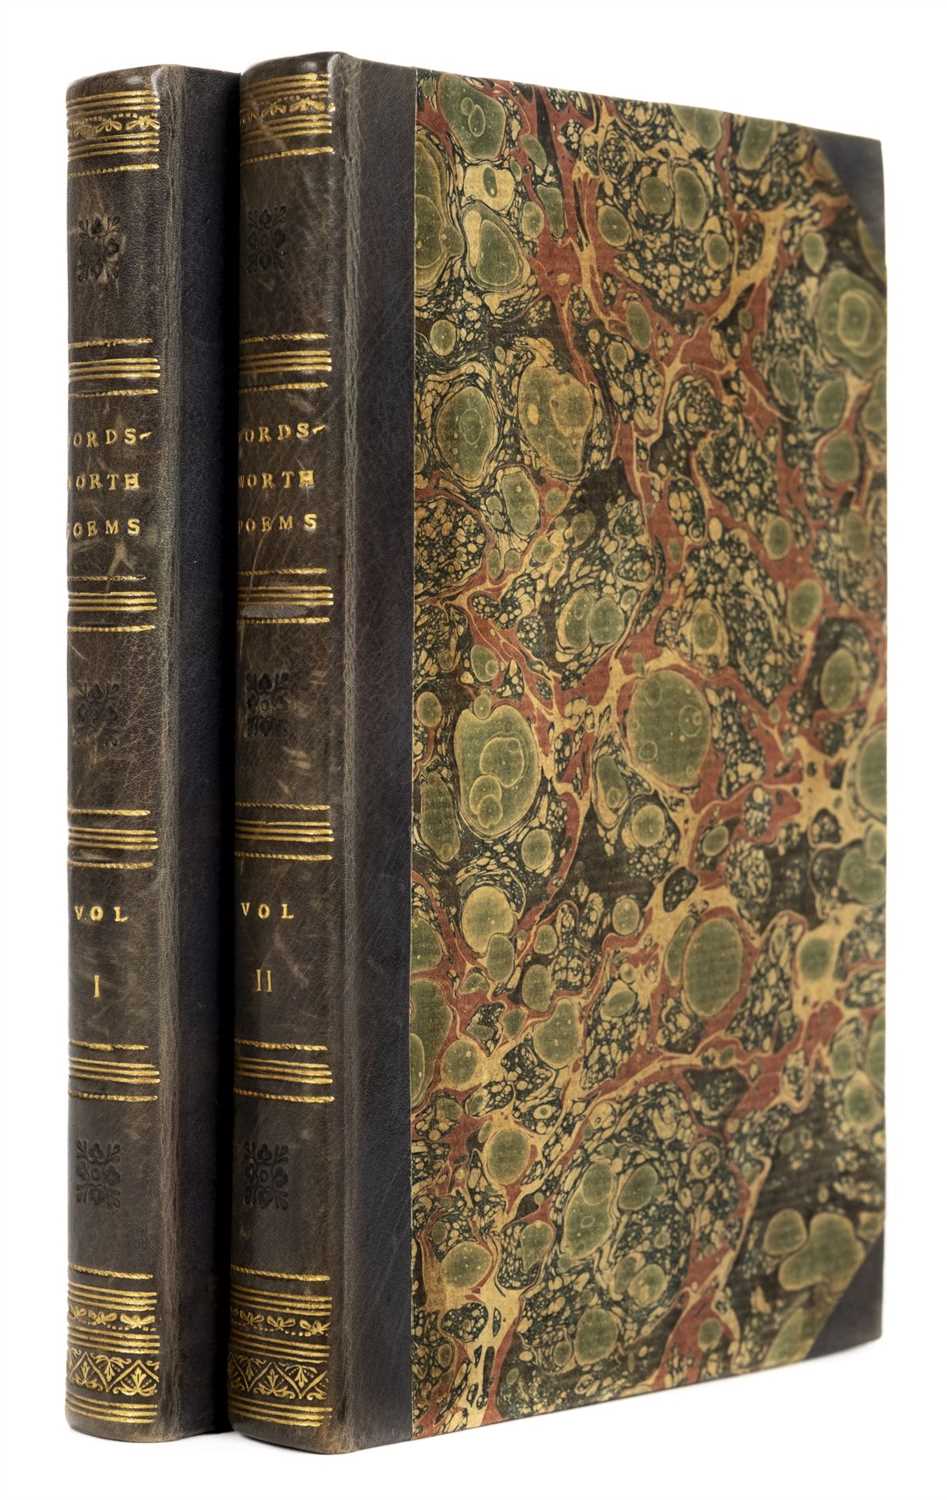 Lot 231 - Wordsworth (William). Poems, in Two Volumes, 2 volumes, 1st edition, 1807